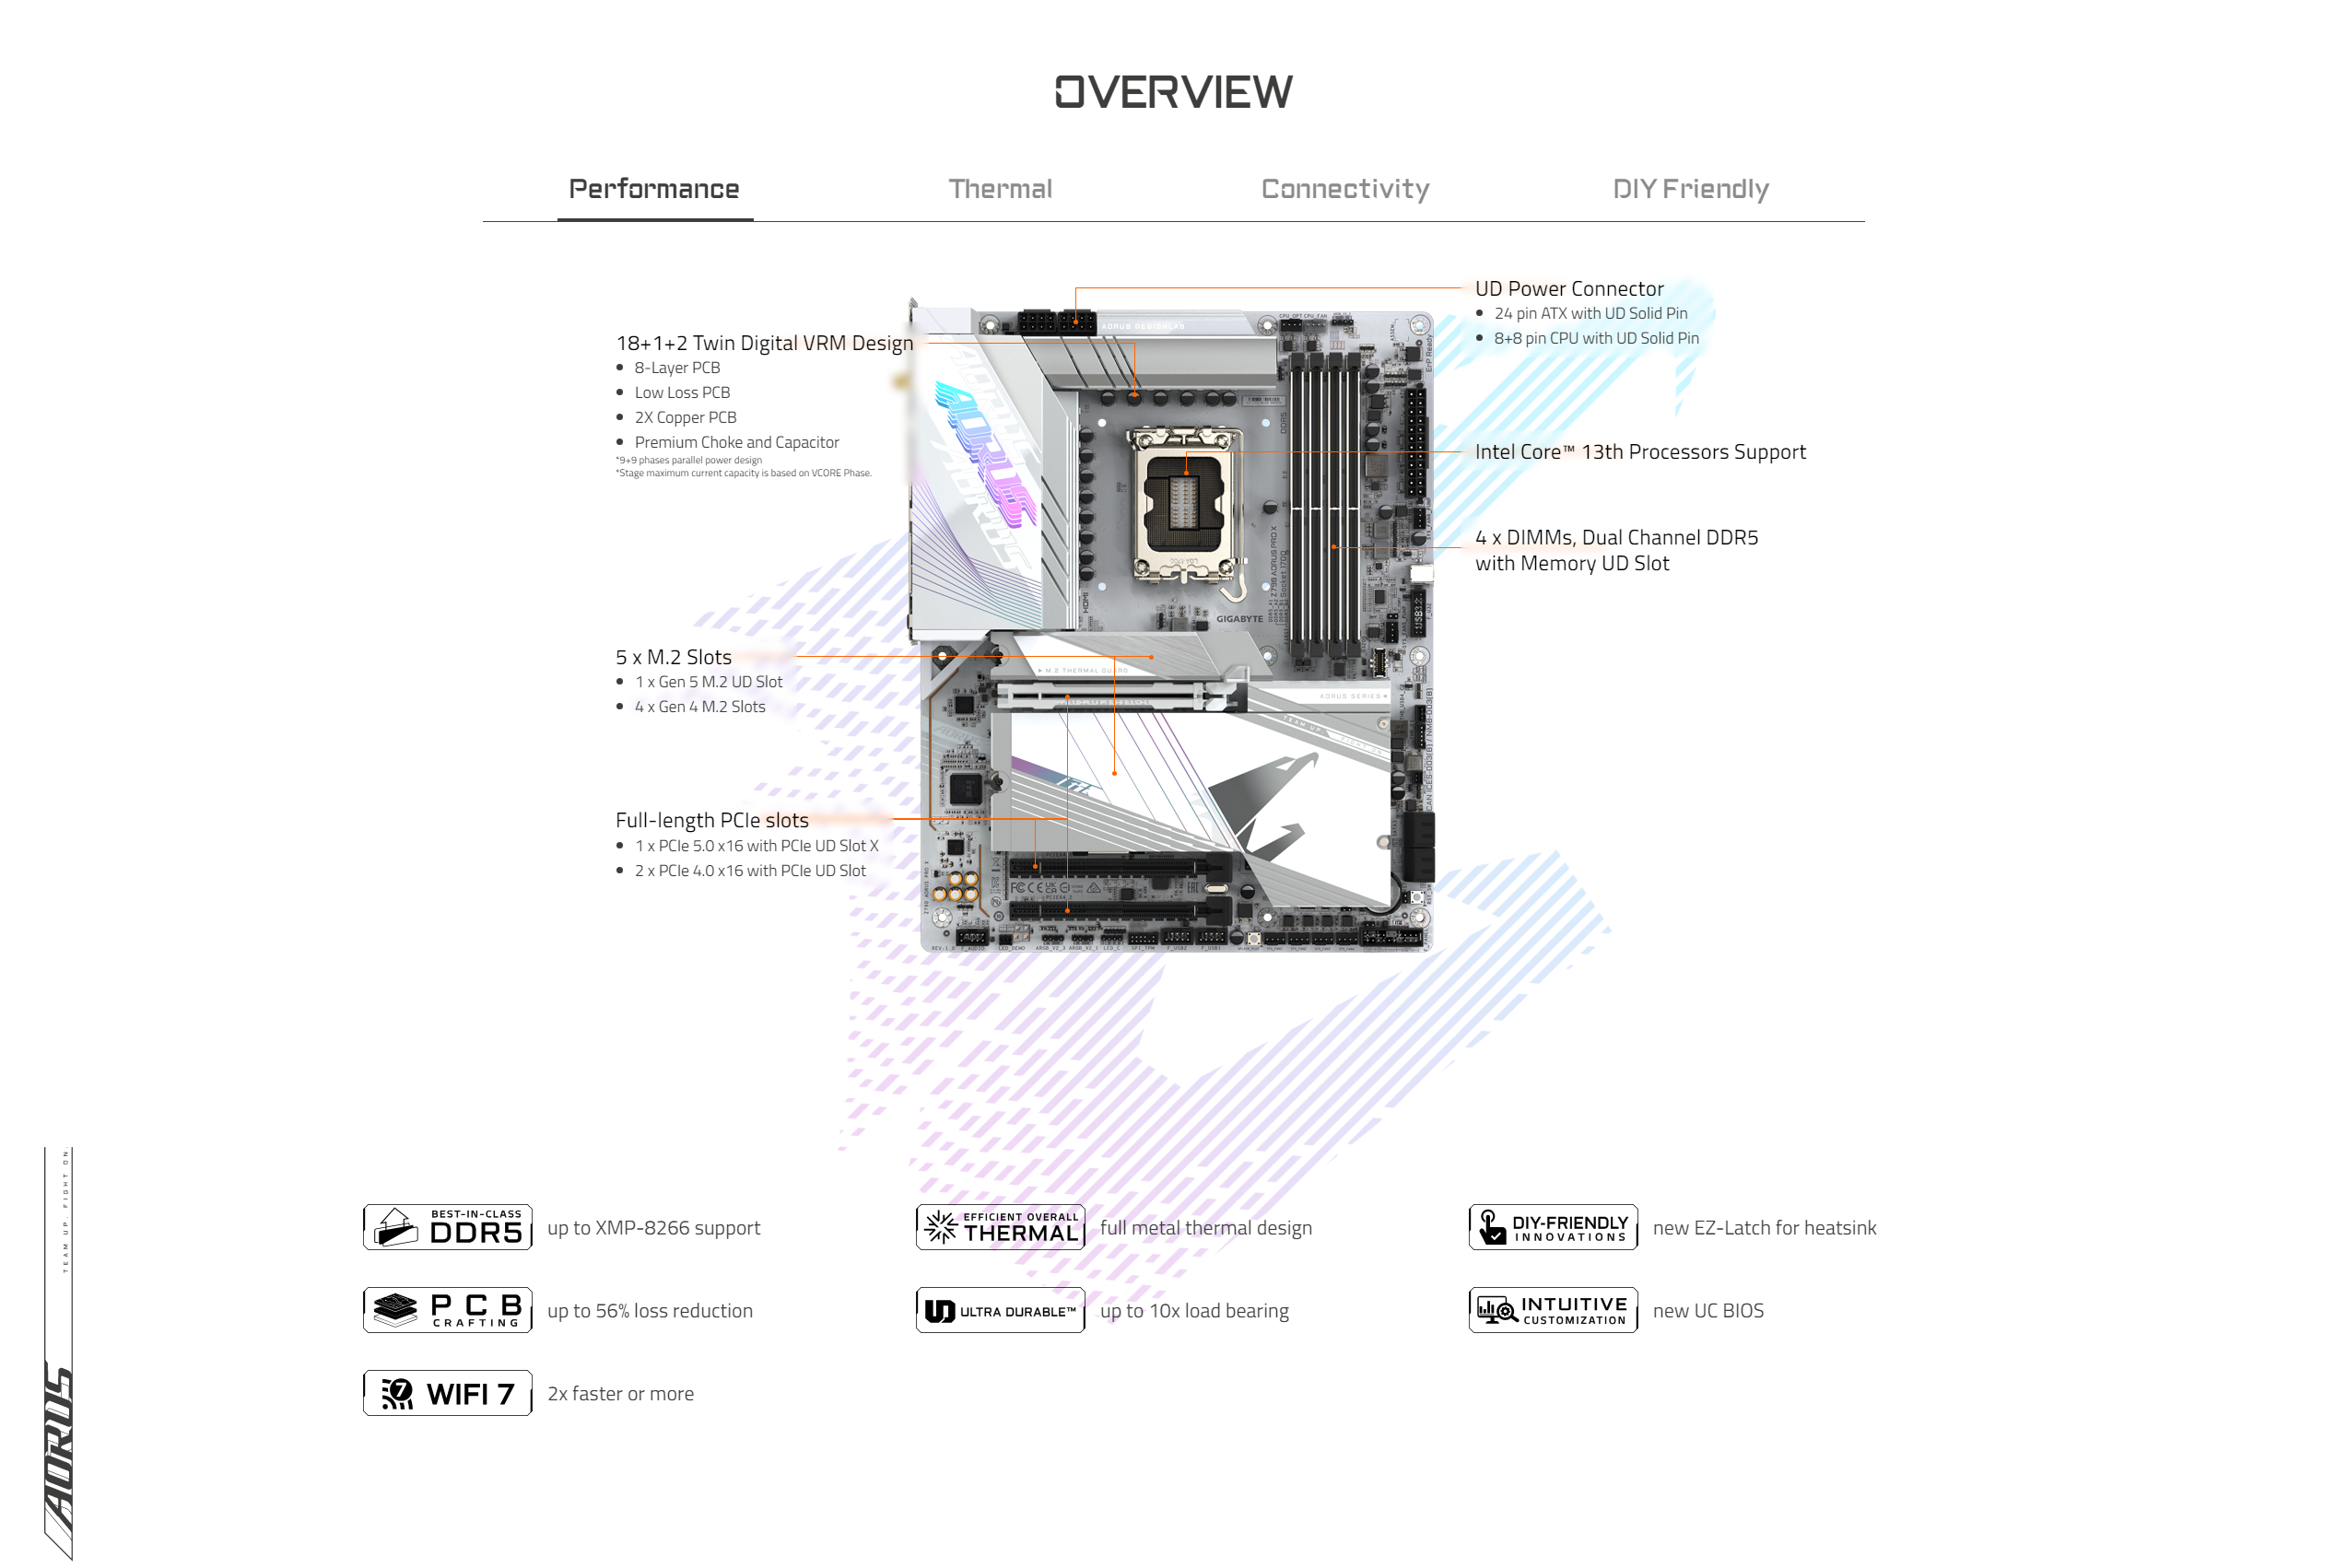 A large marketing image providing additional information about the product Gigabyte Z790 Aorus Pro X LGA1700 ATX Desktop Motherboard - Additional alt info not provided